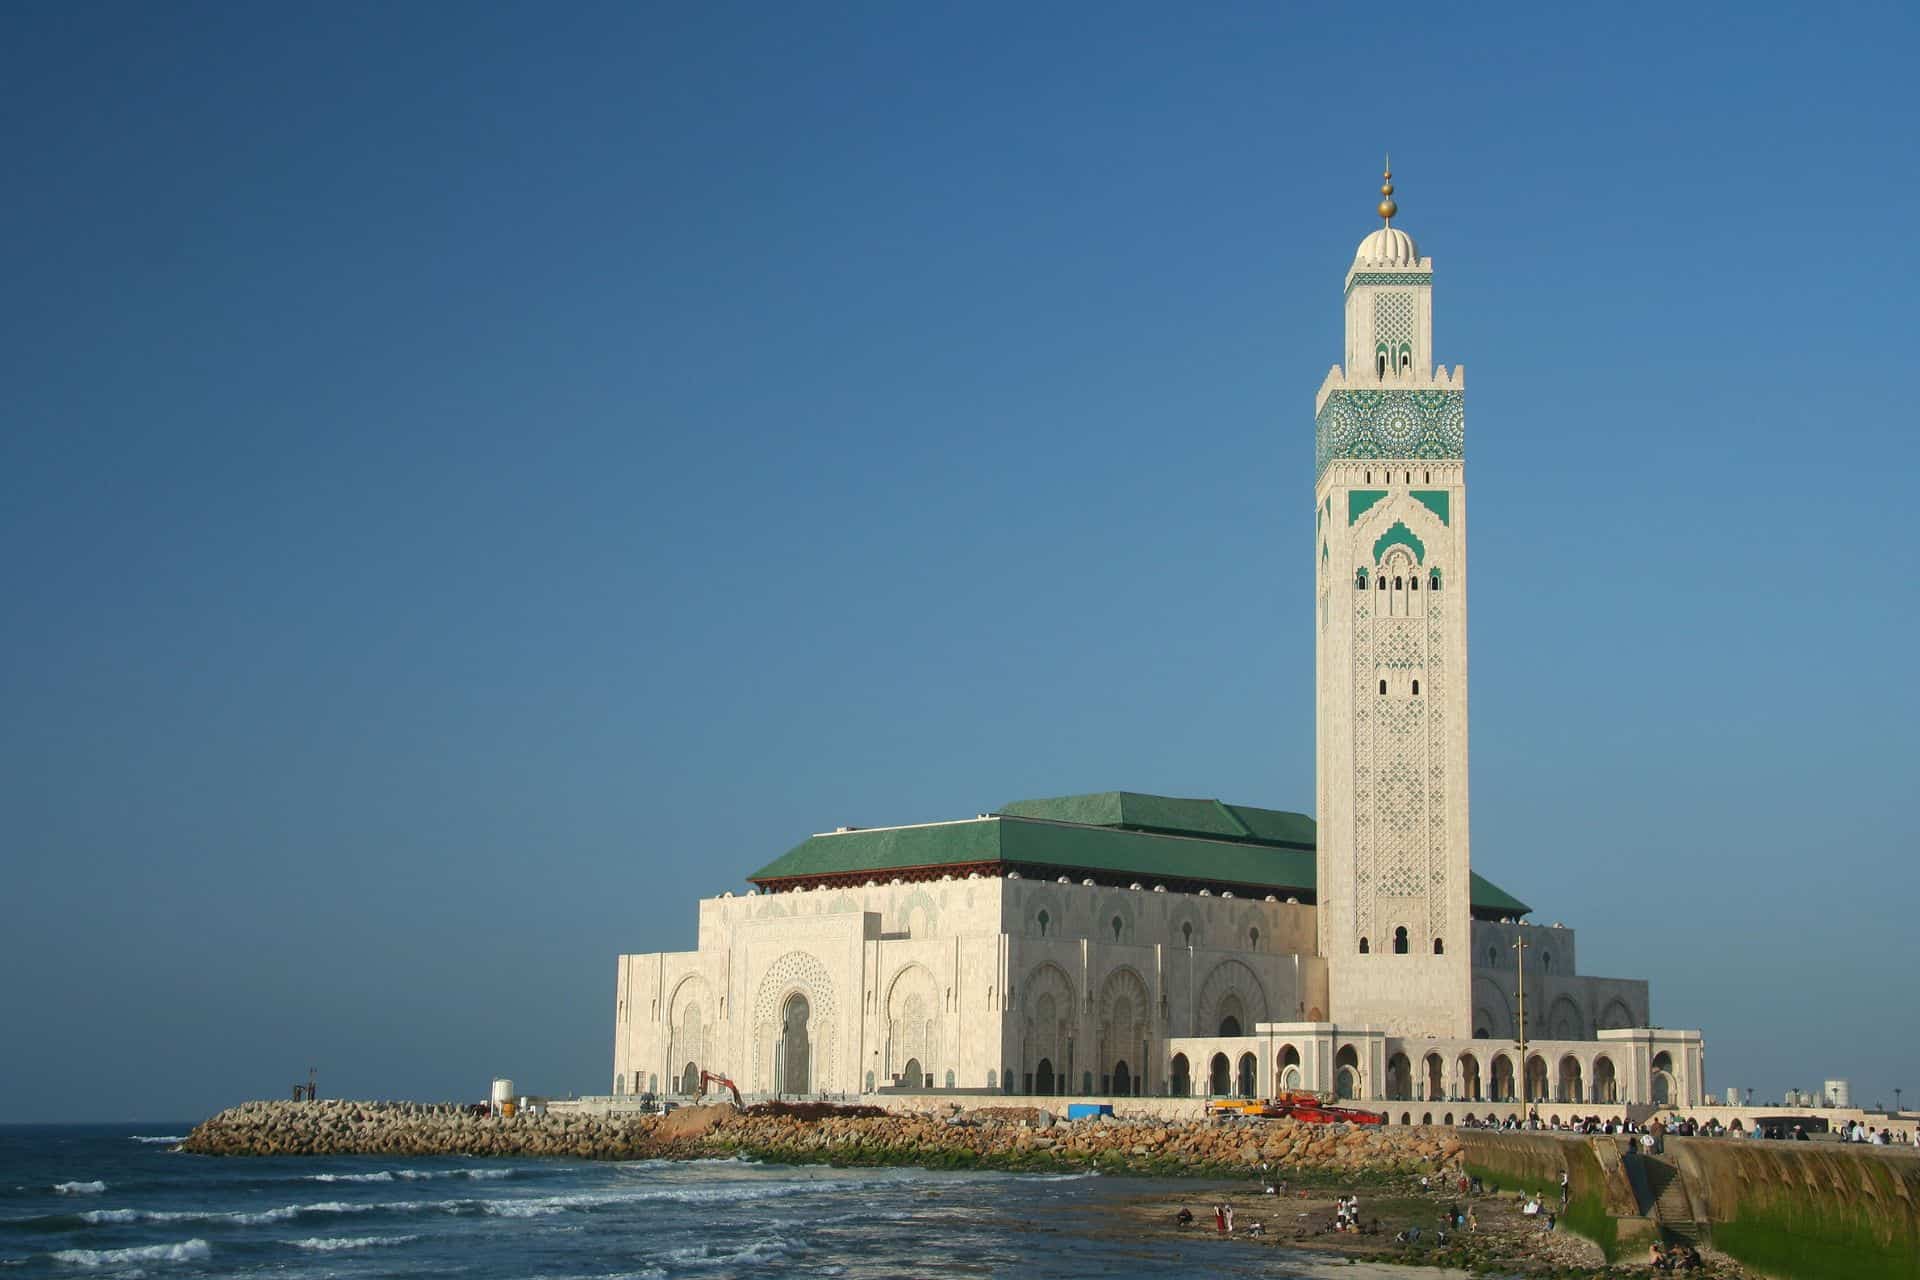 10 Days Private Desert and Cultural Tour from Casablanca